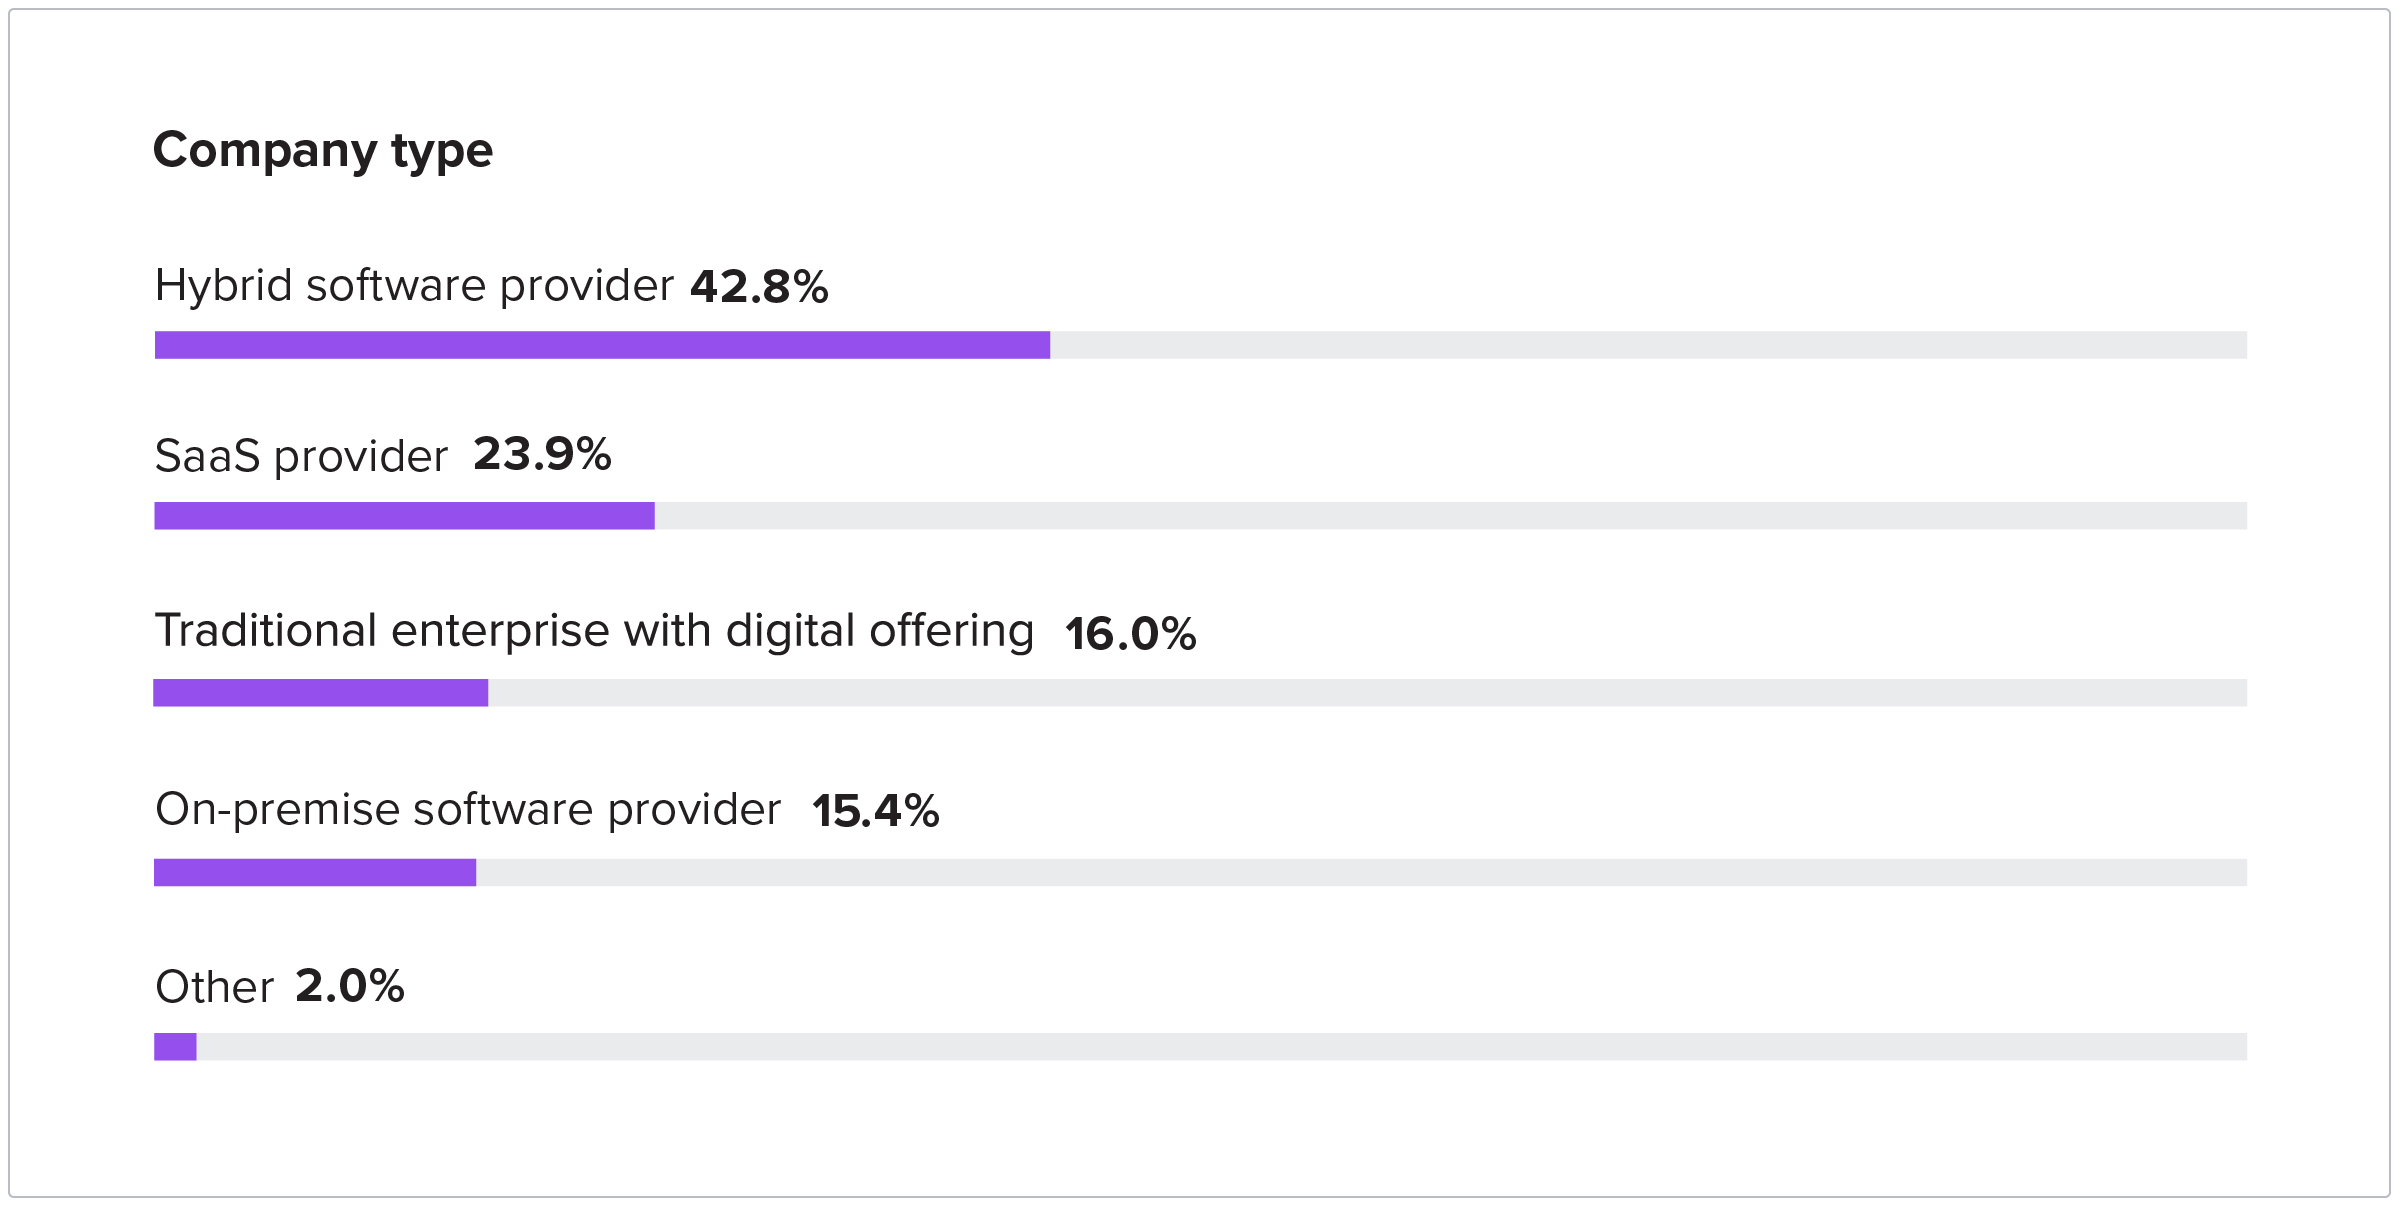 Company Type - Hybrid software provider 42.8%, SaaS provider 23.9%, Traditional enterprise with digital offering 16%, On-premise software provider 15.4%, Other 2%